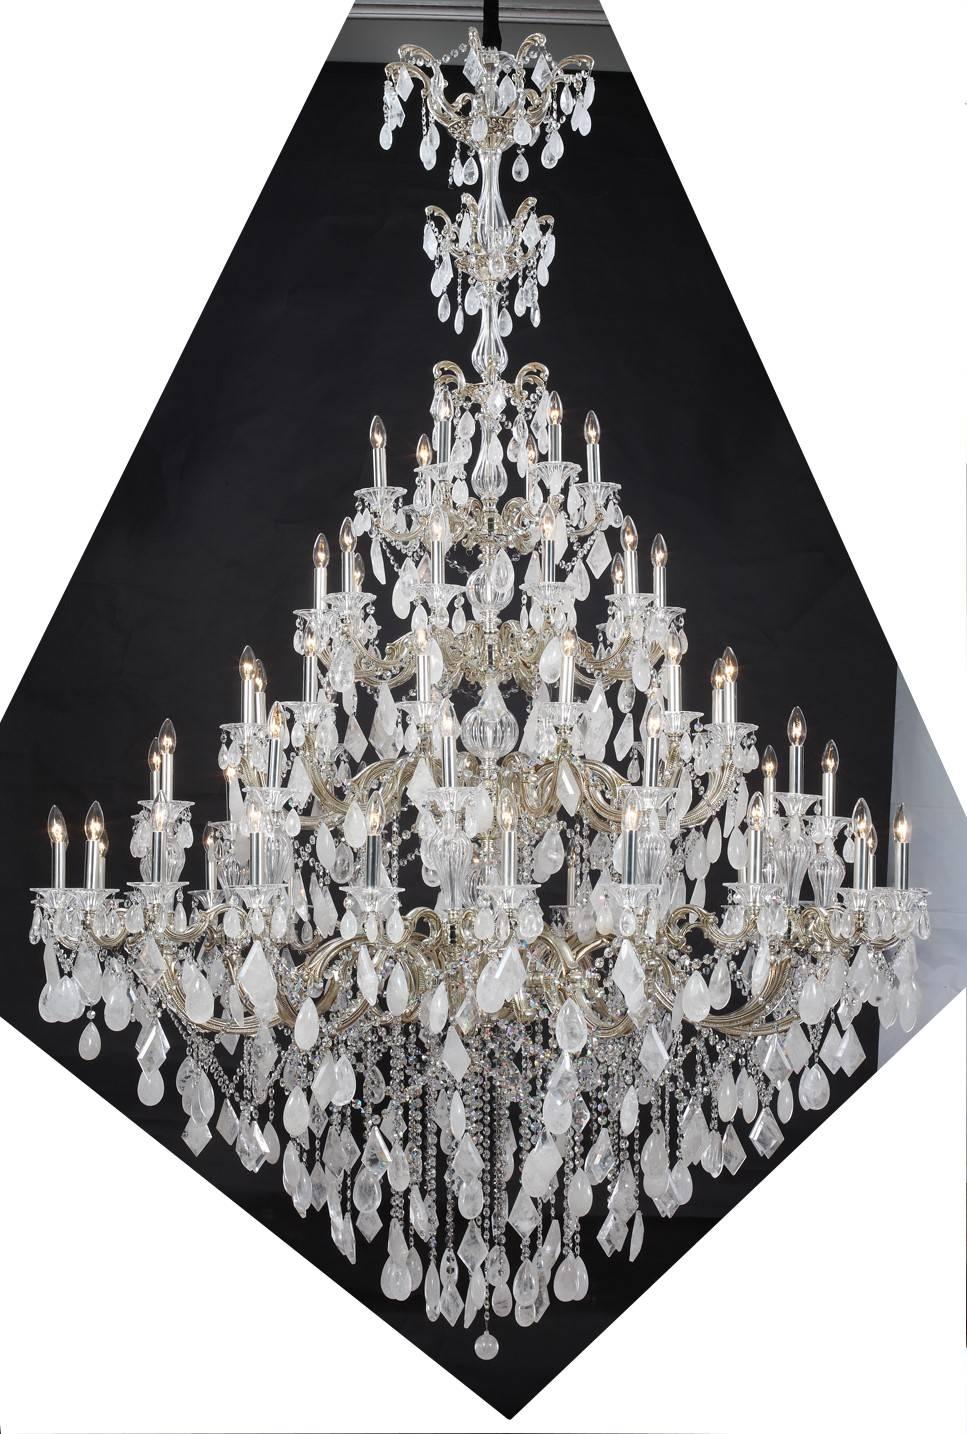 Handcrafted chandelier with cast metal, silver plated scroll detail arms, decorated with a generous covering of real hand cut rock crystal decor, hand-cut crystal glass center body and sconces, creating this luxurious regal sixty-four-light